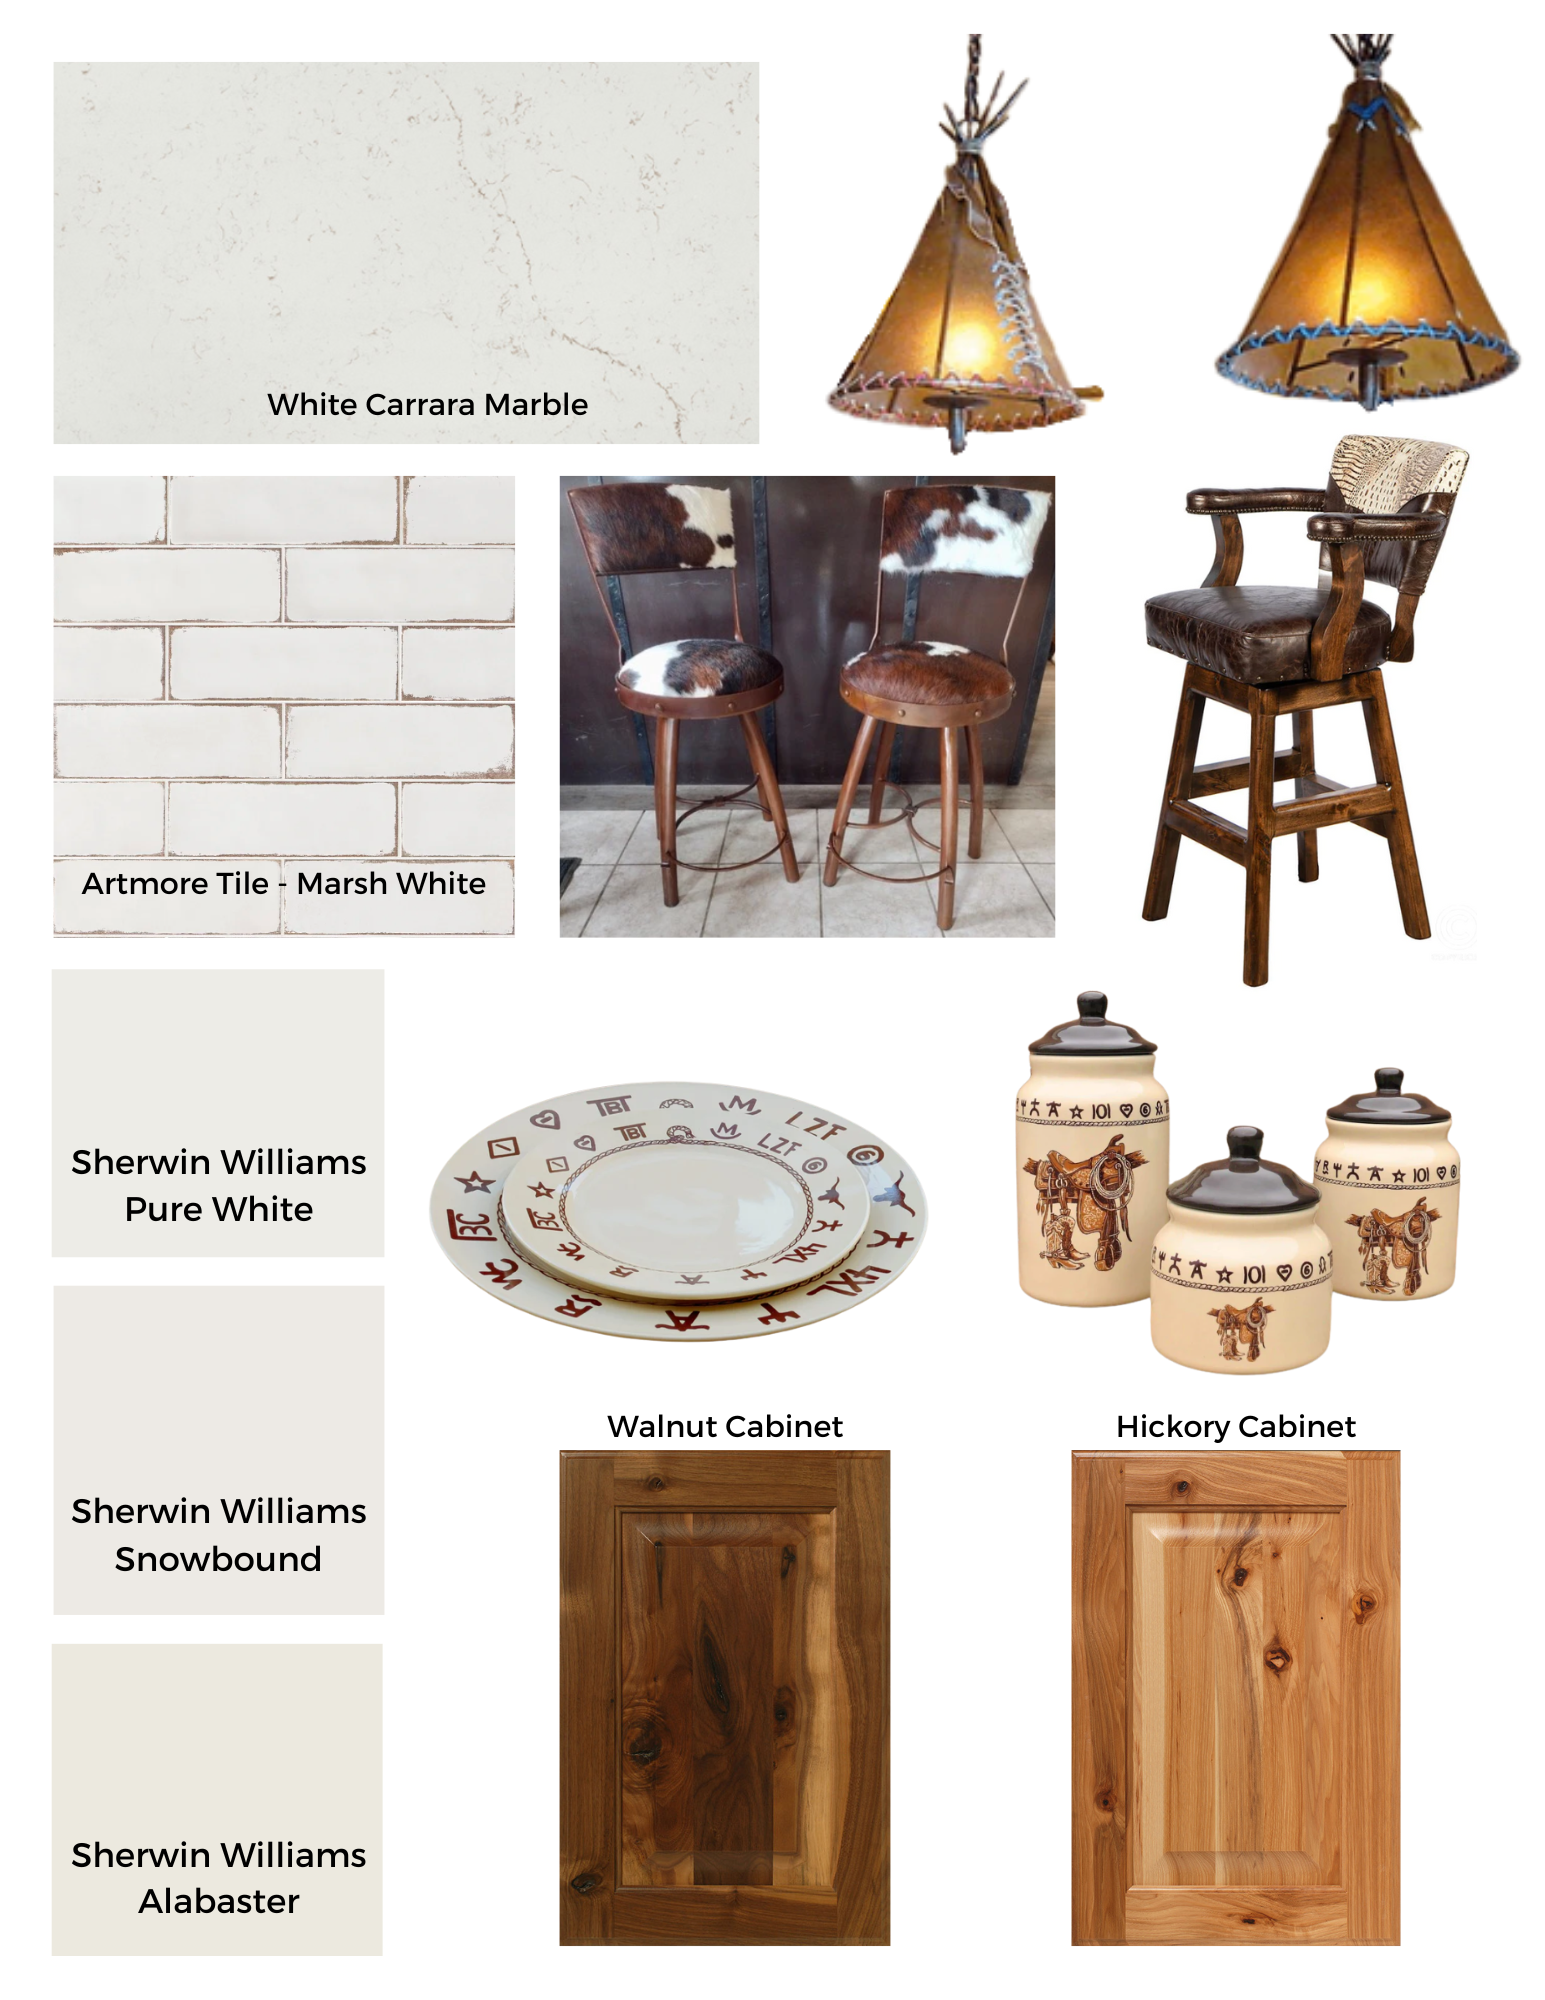 Western Design Board Page 2 | Your Western Decor